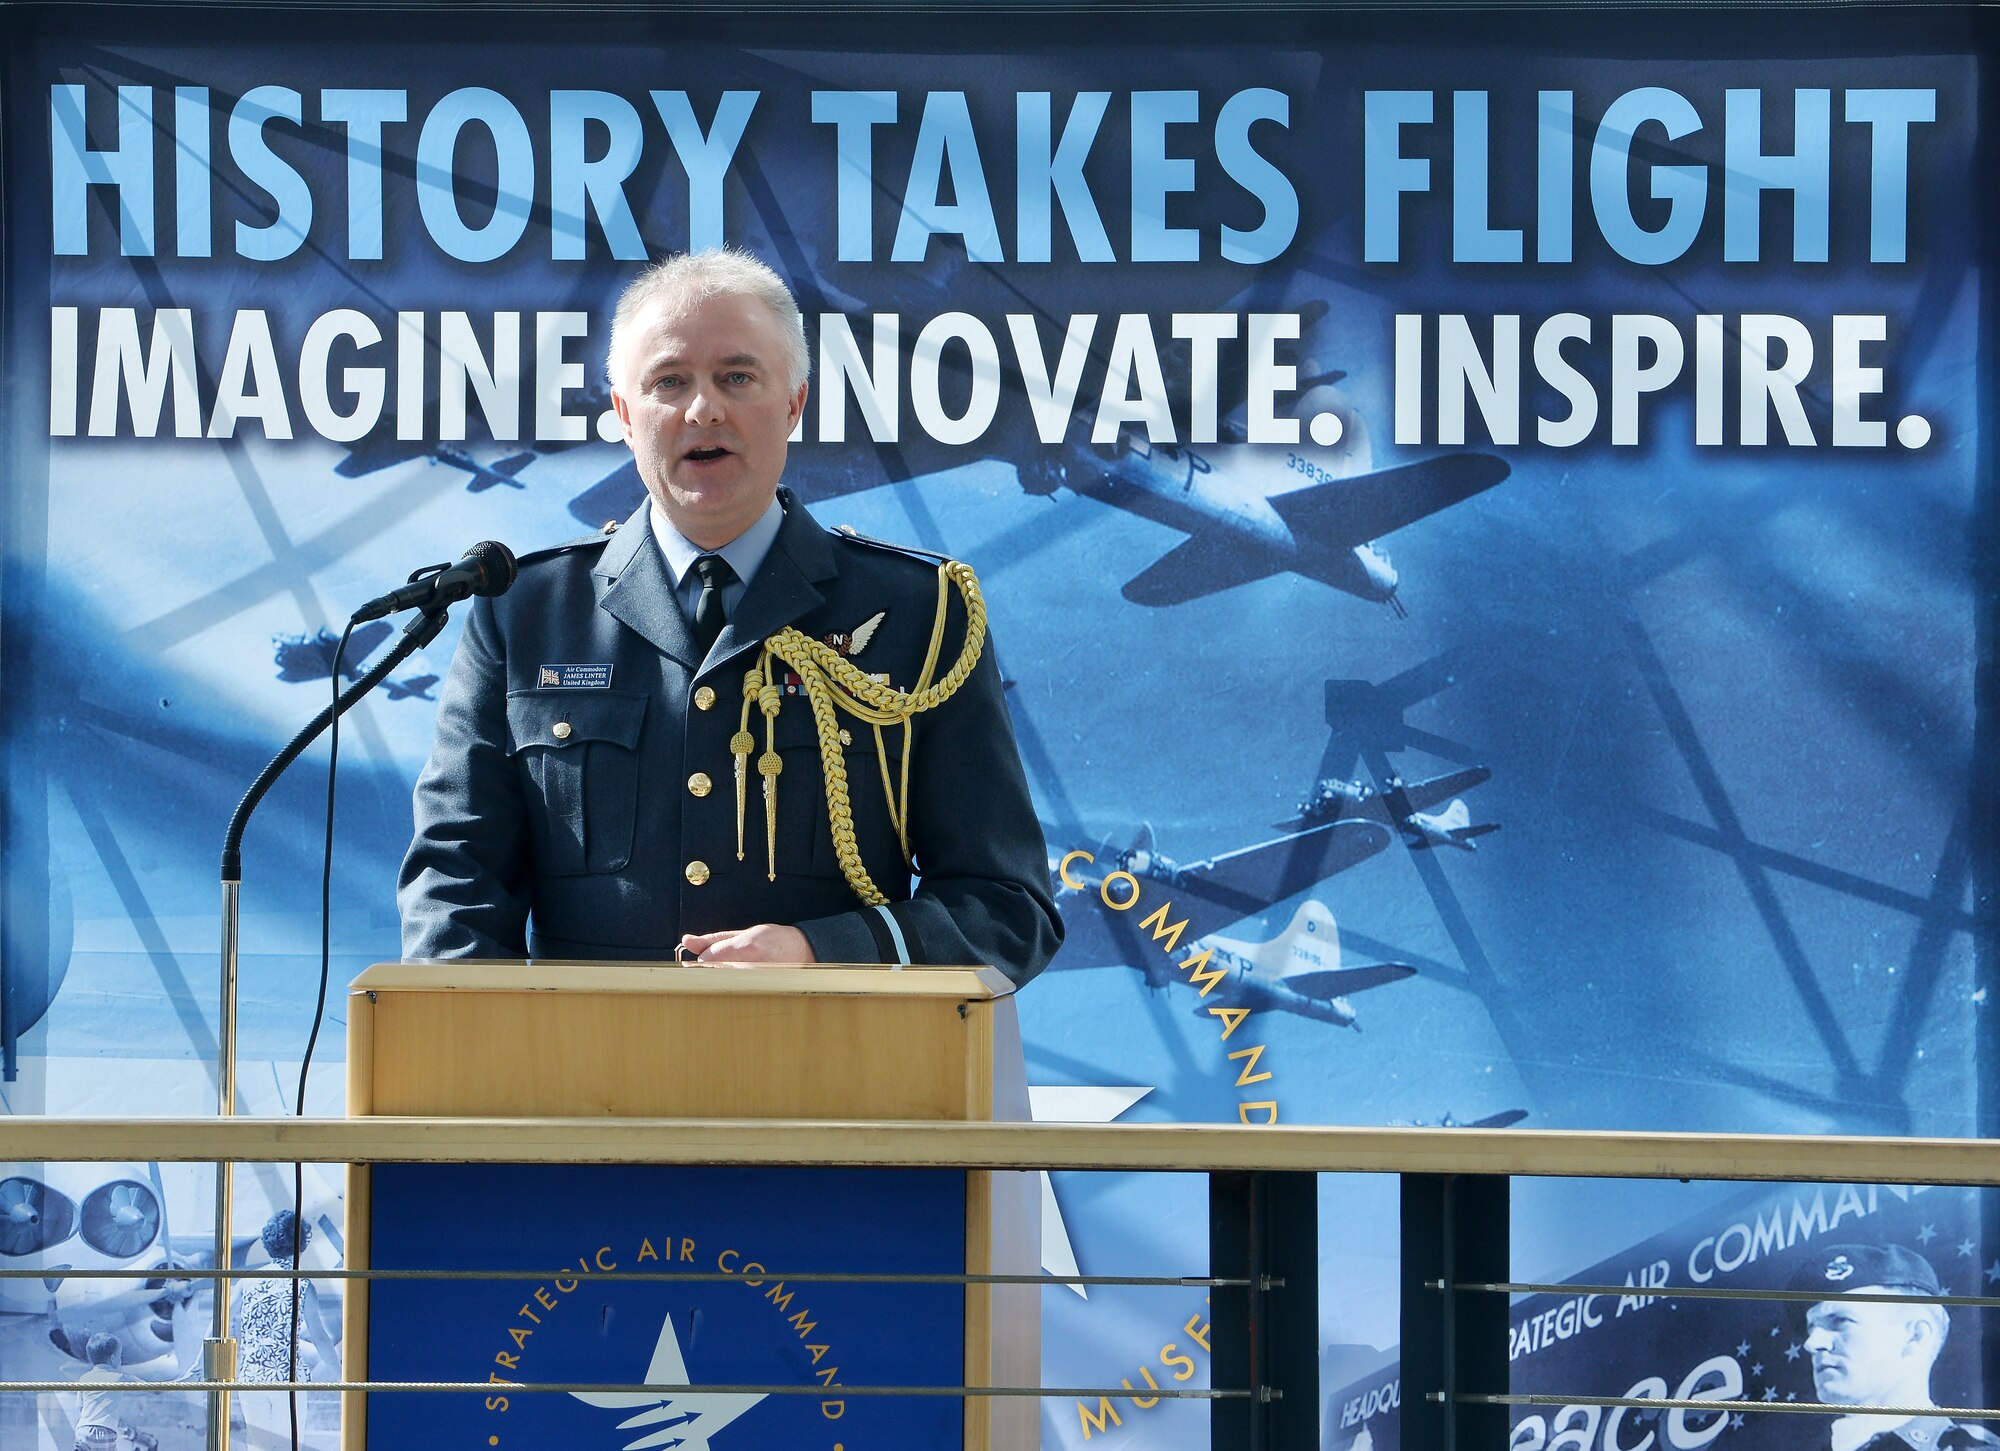 Royal Air Force Air Commodore James Linter, Air Attaché, speaks on the relationship with the RAF and U.S. Air Force has grown over the years during the War and Peace event commemorating the 70th anniversary of the U.S. Air Force and 100th anniversary of the U.K. Royal Air Force ceremony on April 7, 2018 inside the Strategic Air and Space Museum in Ashland, Nebraska.